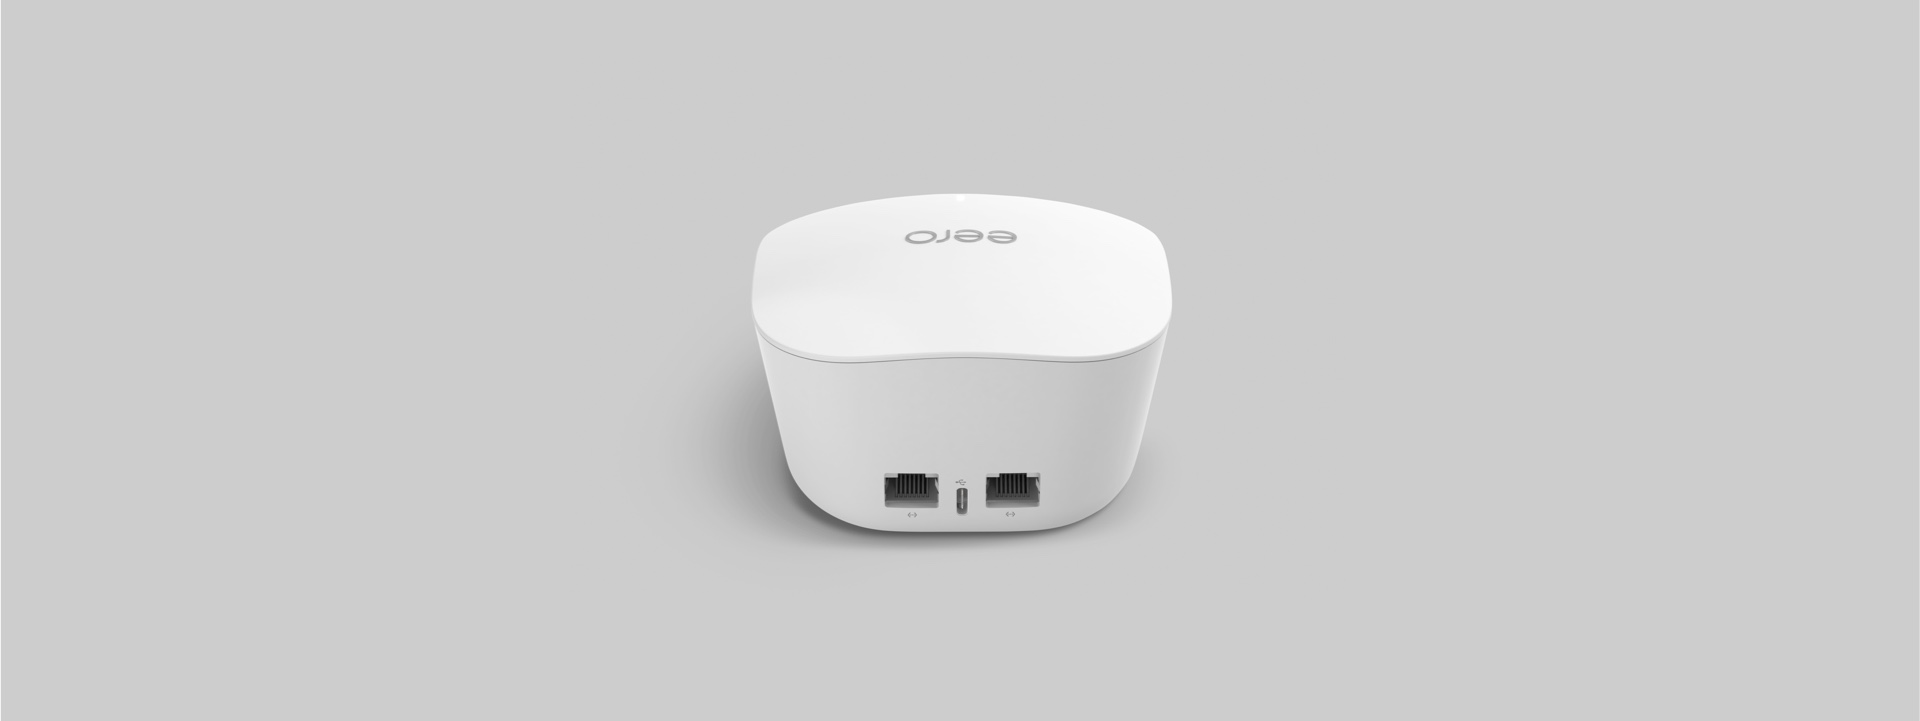 connect to eero router